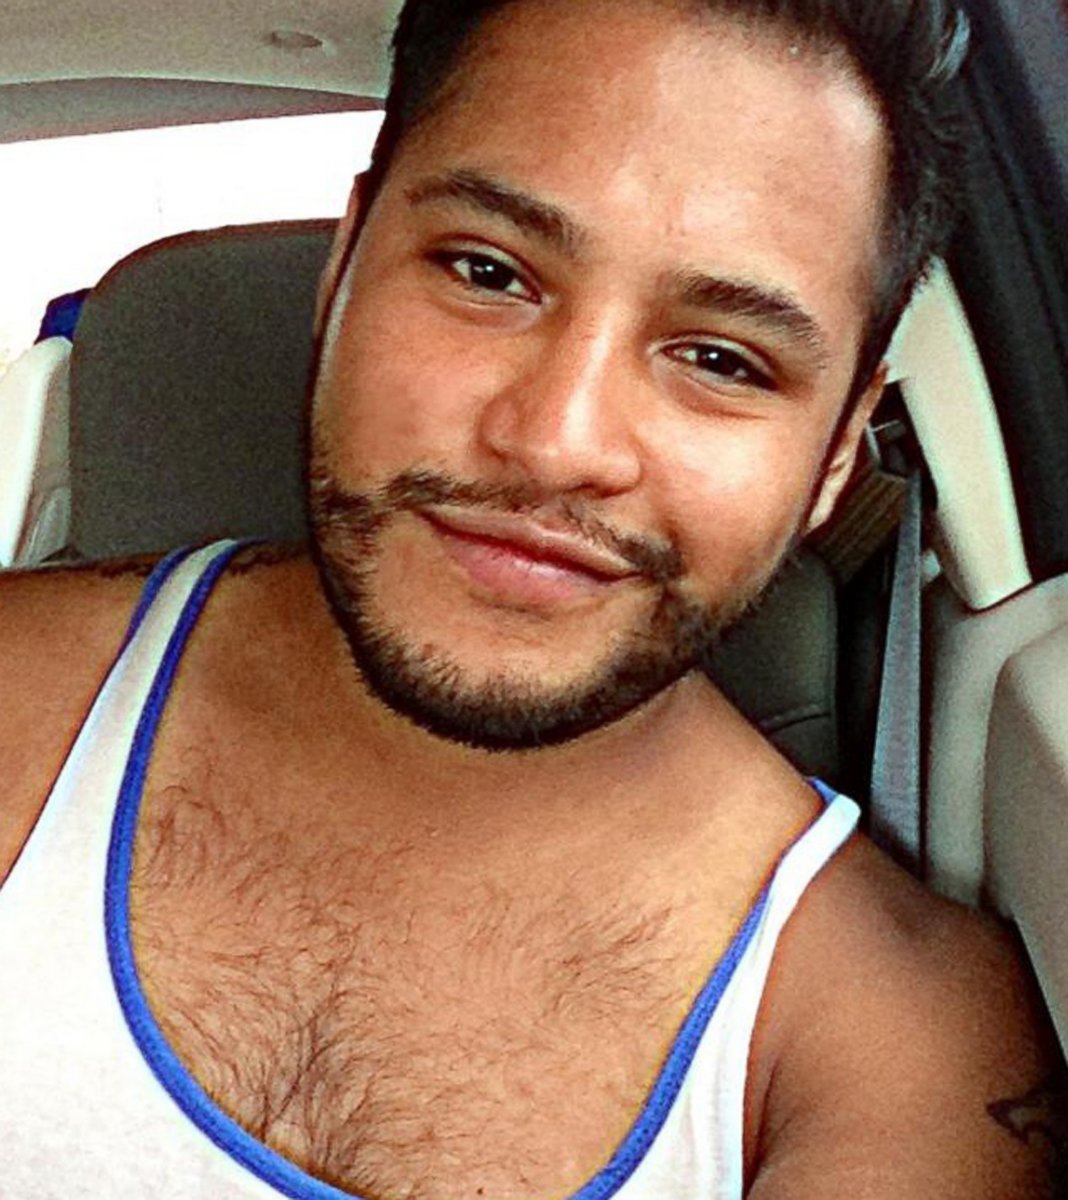 PHOTO: This undated photo shows Frank Hernandez, one of the people killed in the Pulse nightclub in Orlando, Fla., early Sunday, June 12, 2016. 